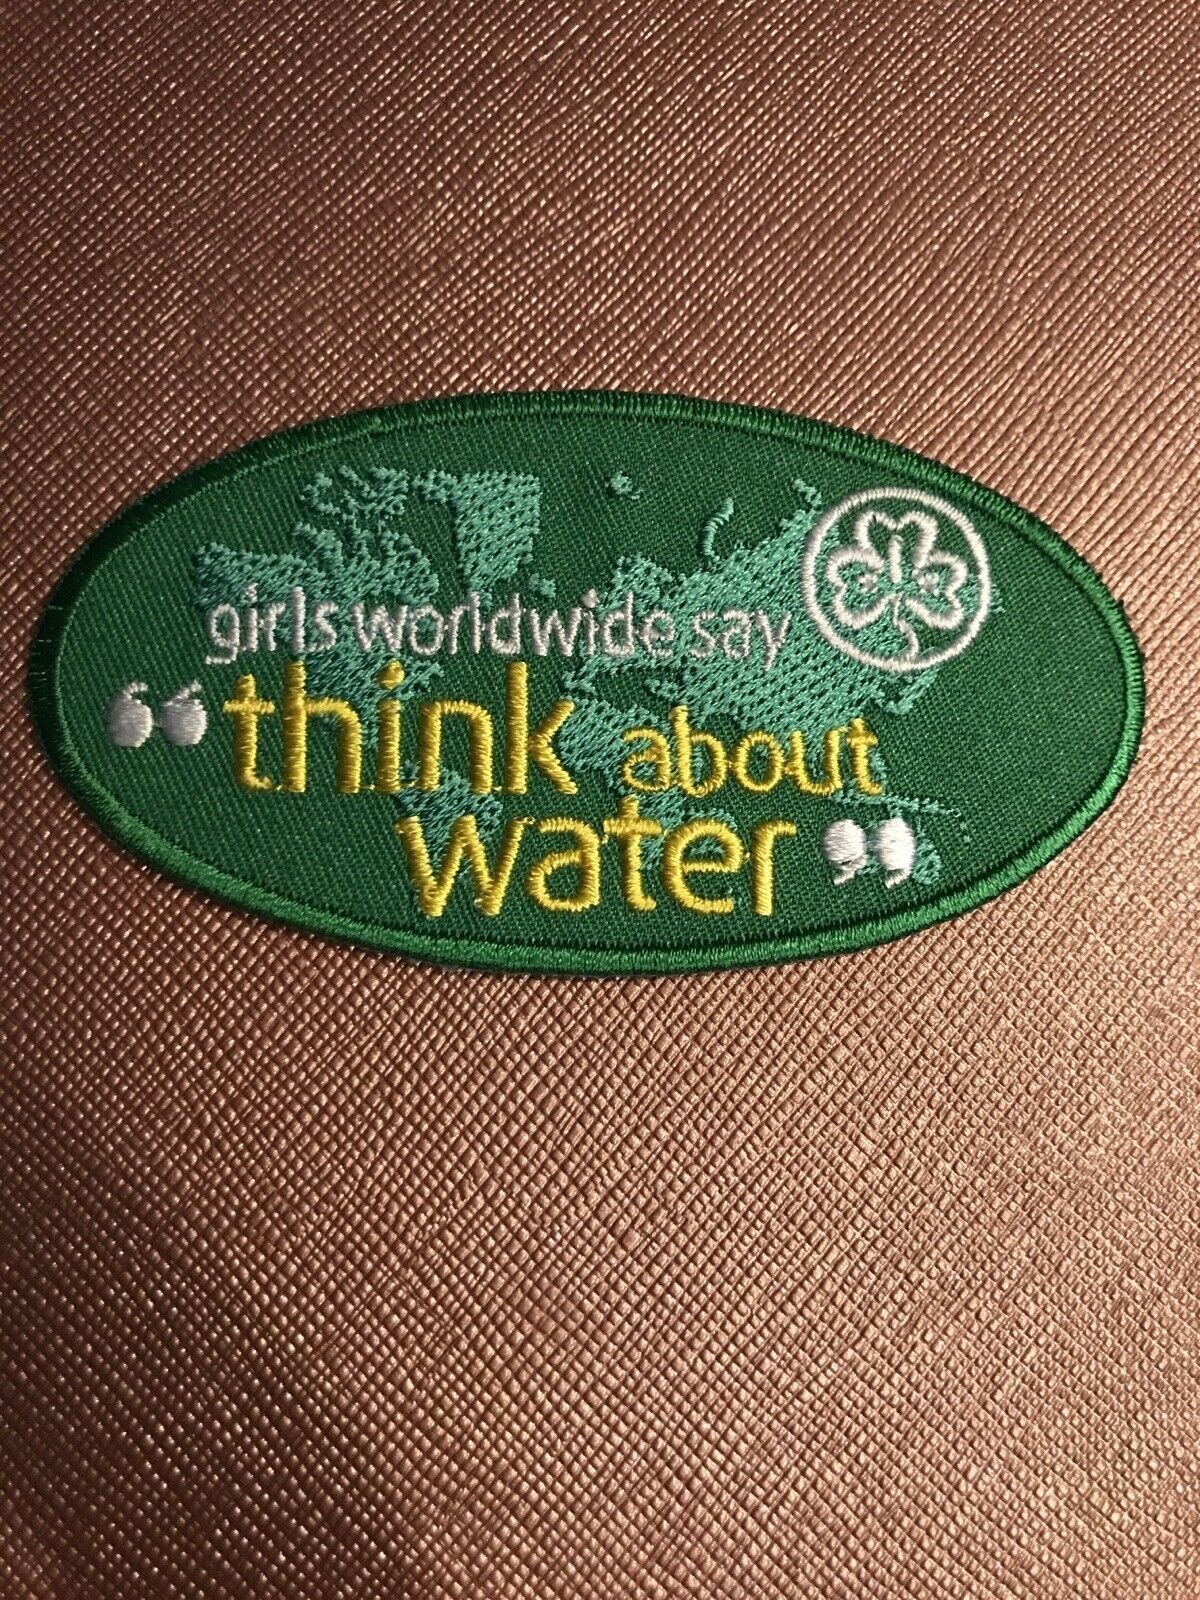 THINKING DAY WAGGGS patch International Friendship Worldwide Girl Scouts Guides